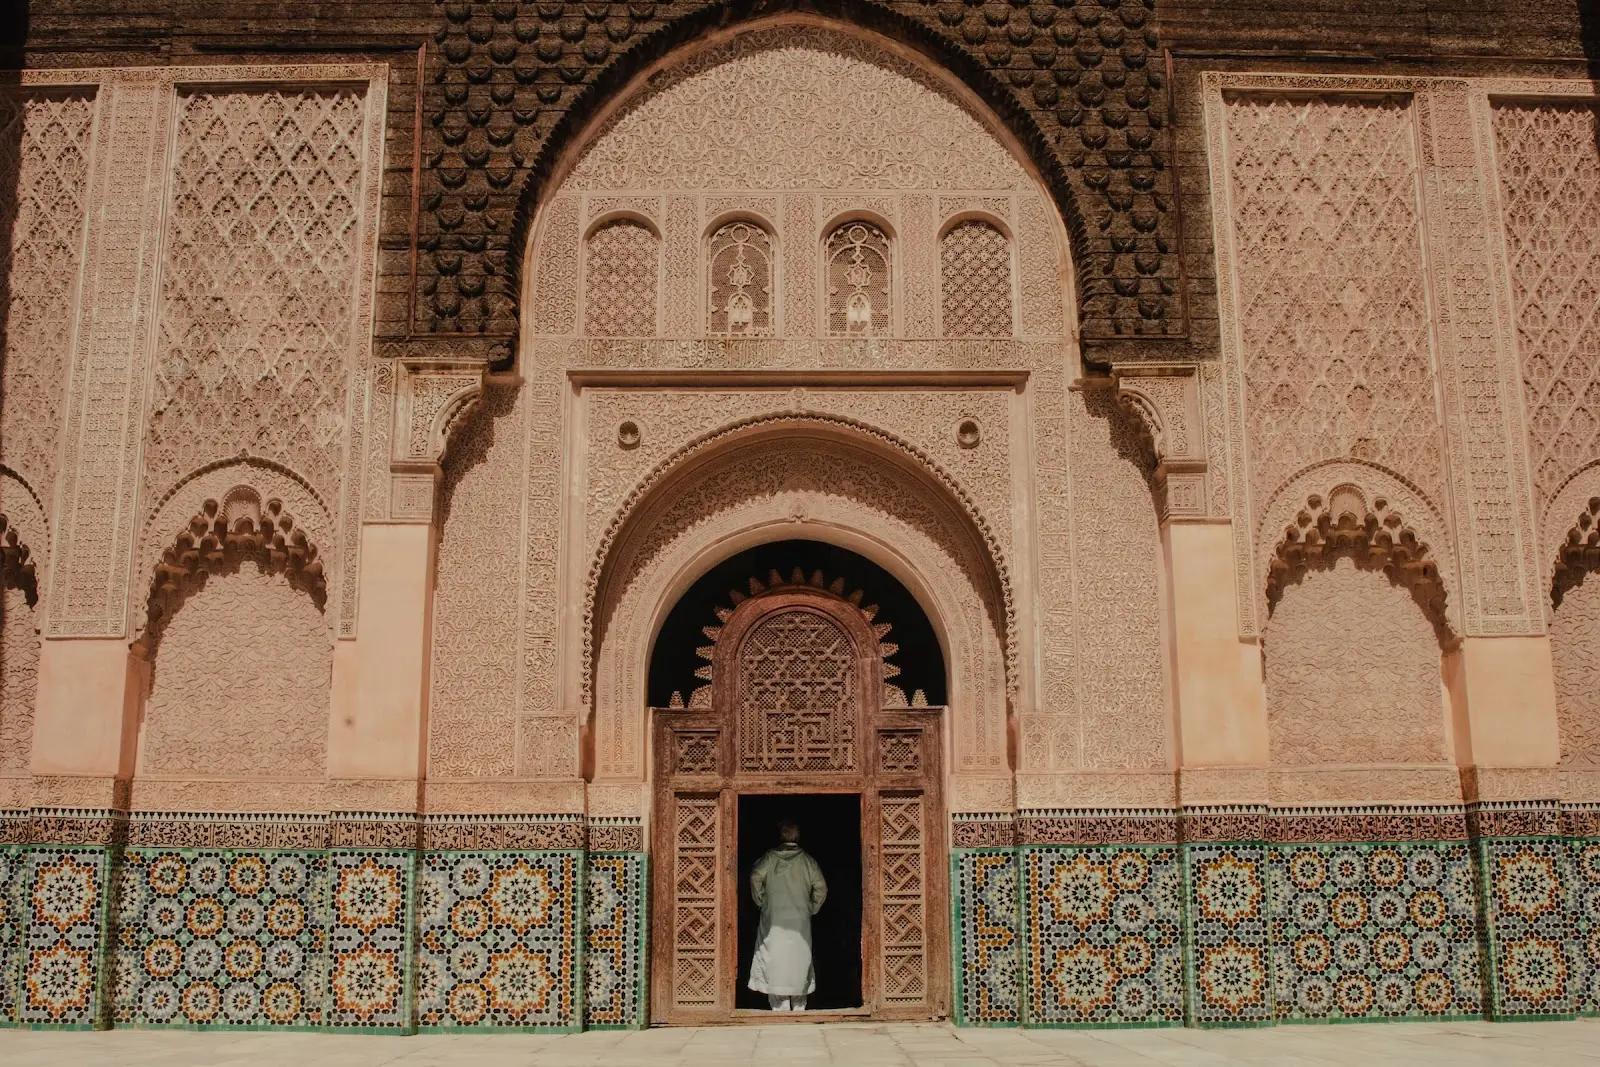 An ornate sandstone temple covered with green and yellow symmetrical tiles.